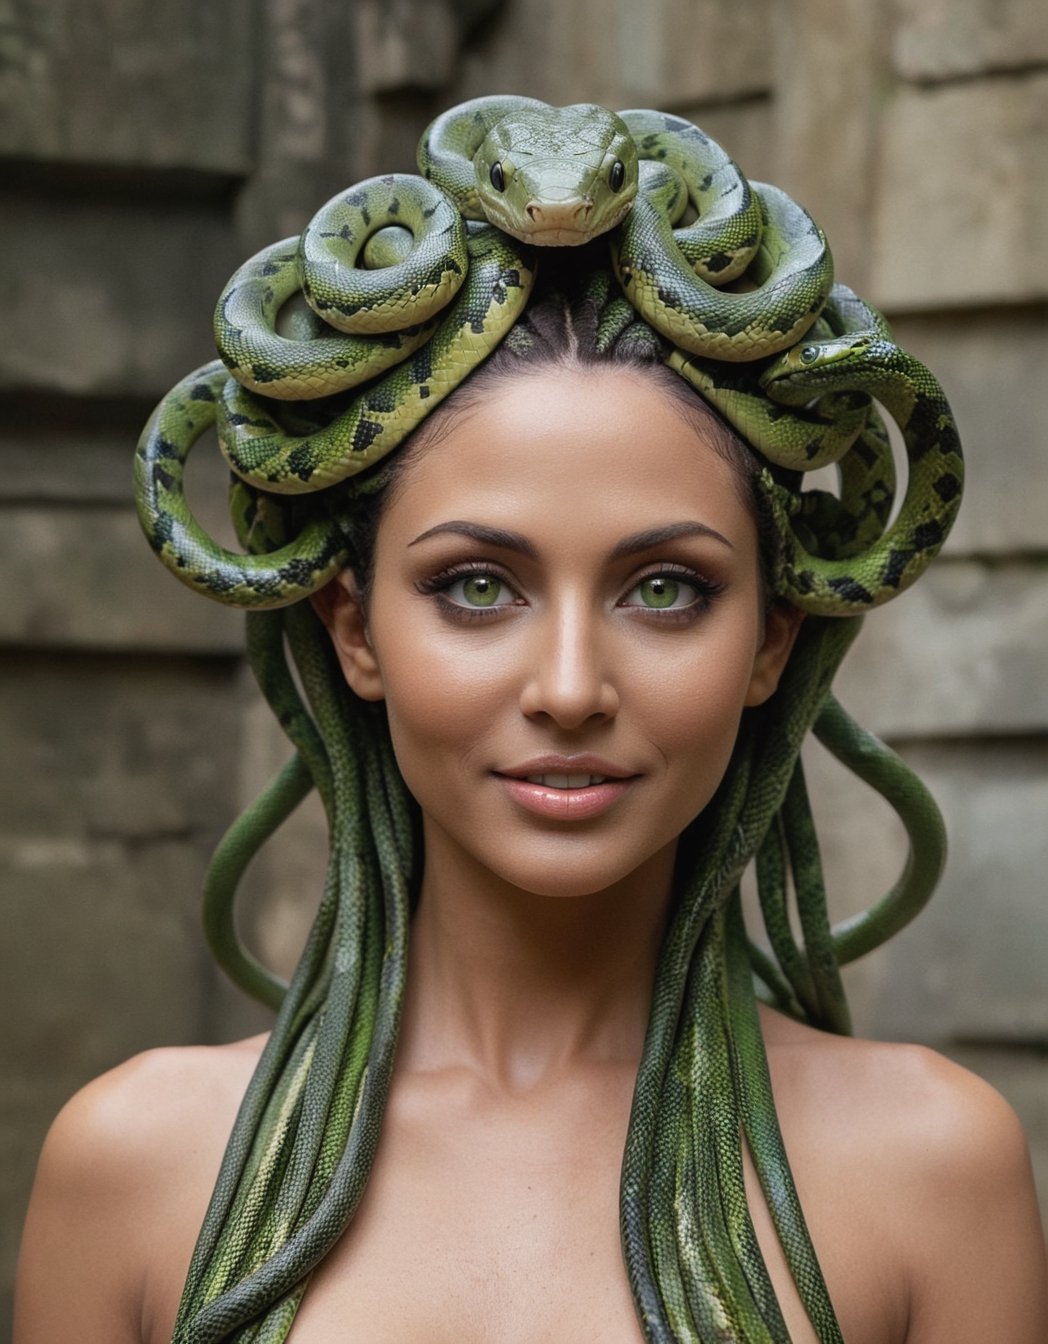 ((ultra realistic)), hyper details, best quality, beautifull exotic woman ((Medusa)), (hairless), ((many snakes come out of his scalp towards the camera)), mischievous smile, (big bright green eyes), rough and dry skin, snakes looking camera, Human skin with stone texture, (background of an ancient temple), masterpiece, cinematic moviemaker style